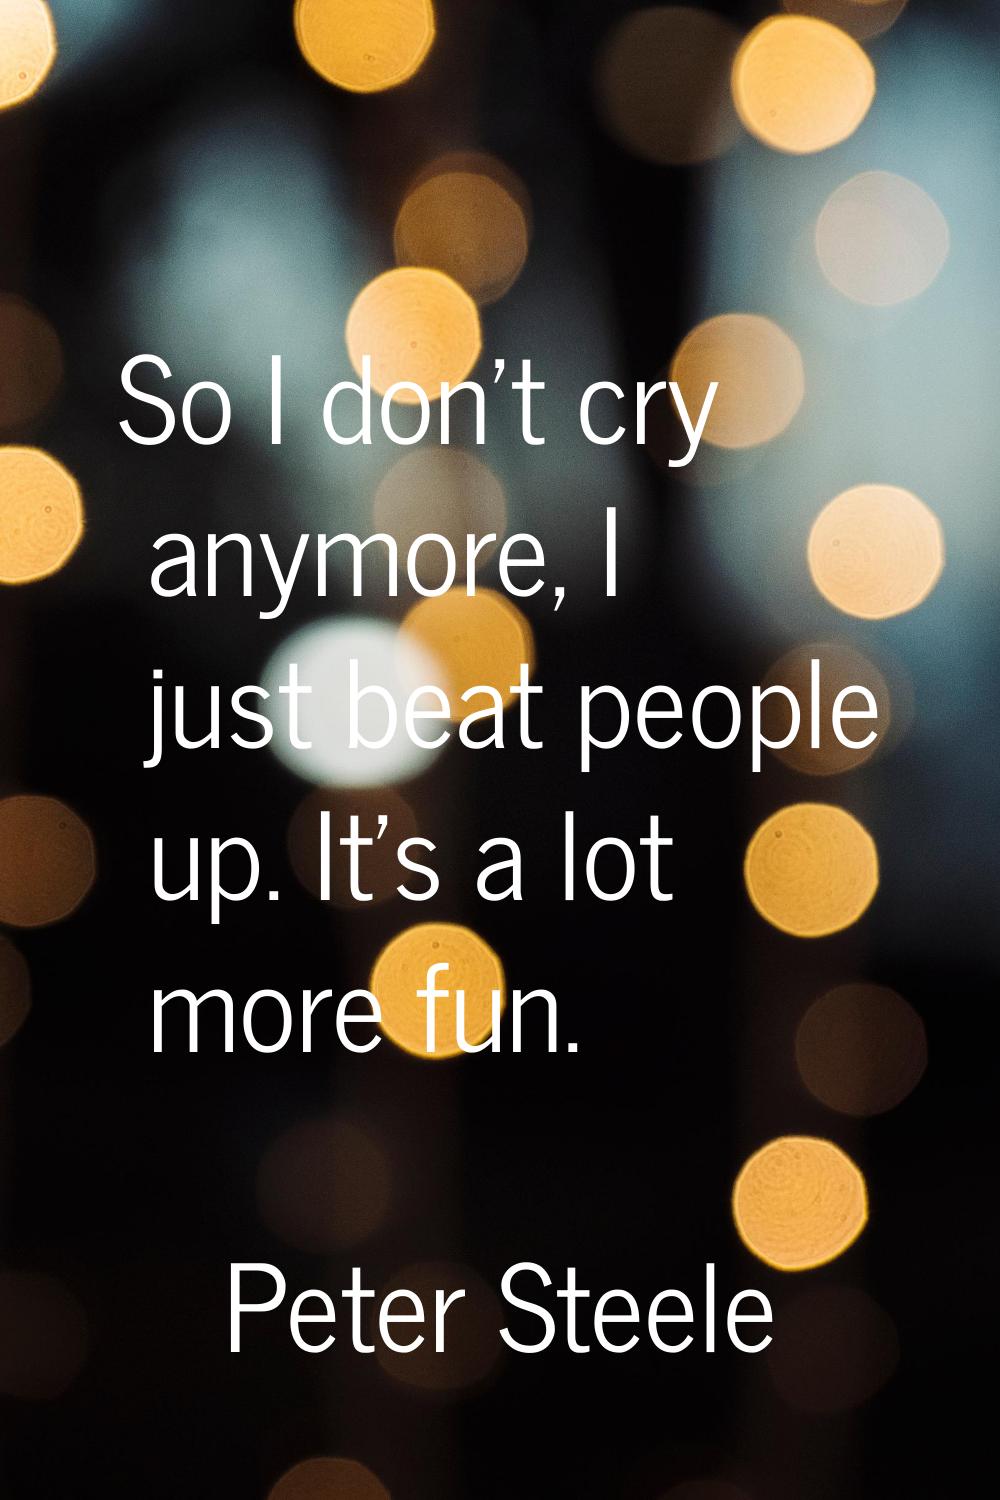 So I don't cry anymore, I just beat people up. It's a lot more fun.